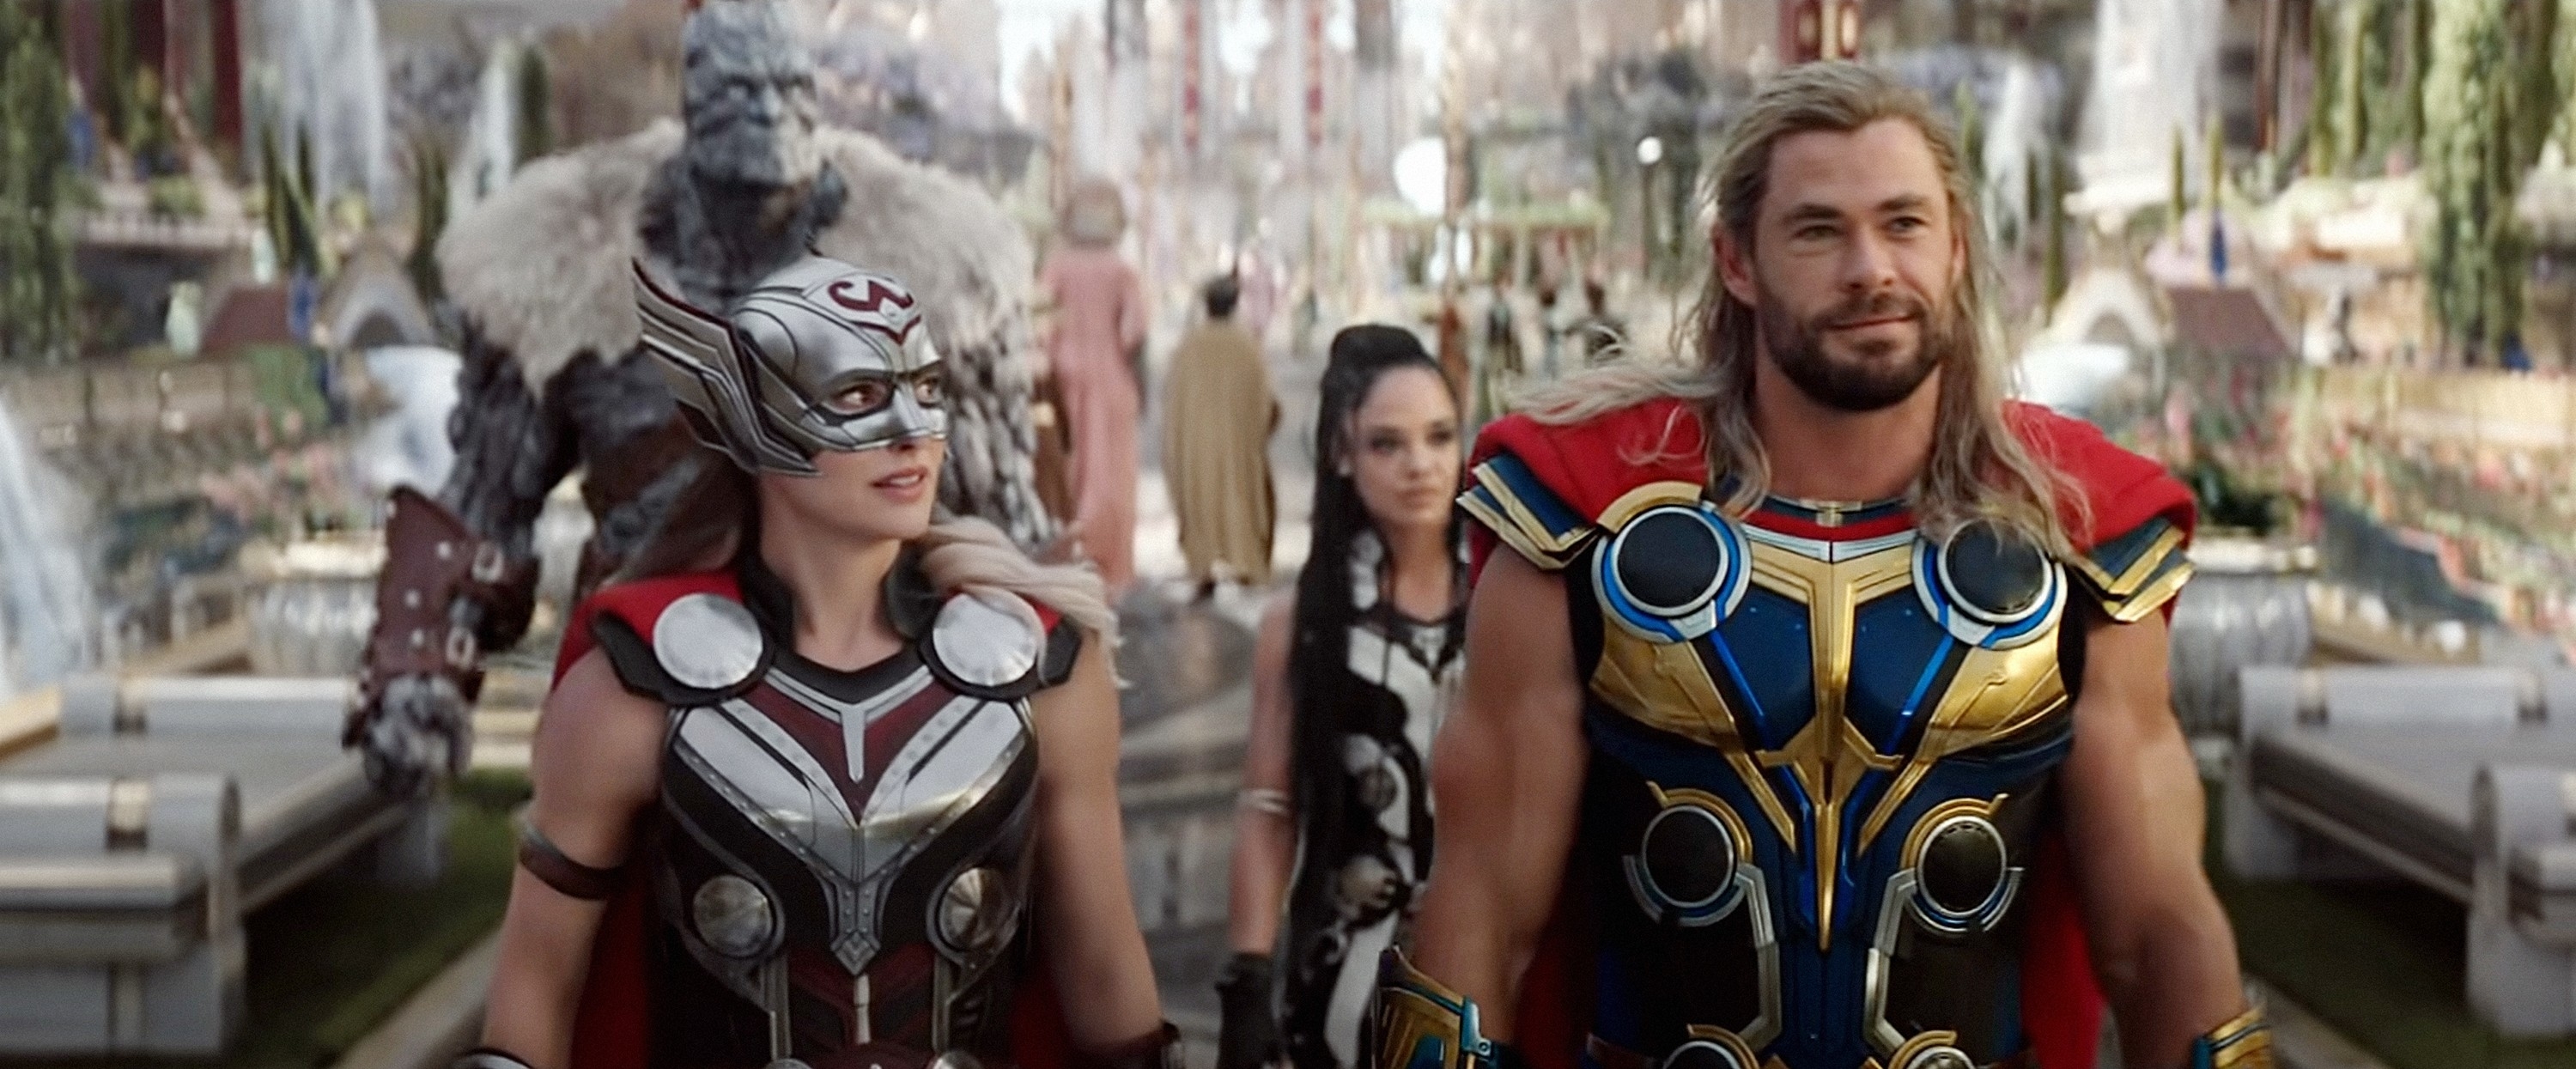 Mighty Thor and Thor walking confidently in Asgard, with Valkyrie and Korg in the background. They wear their superhero costumes